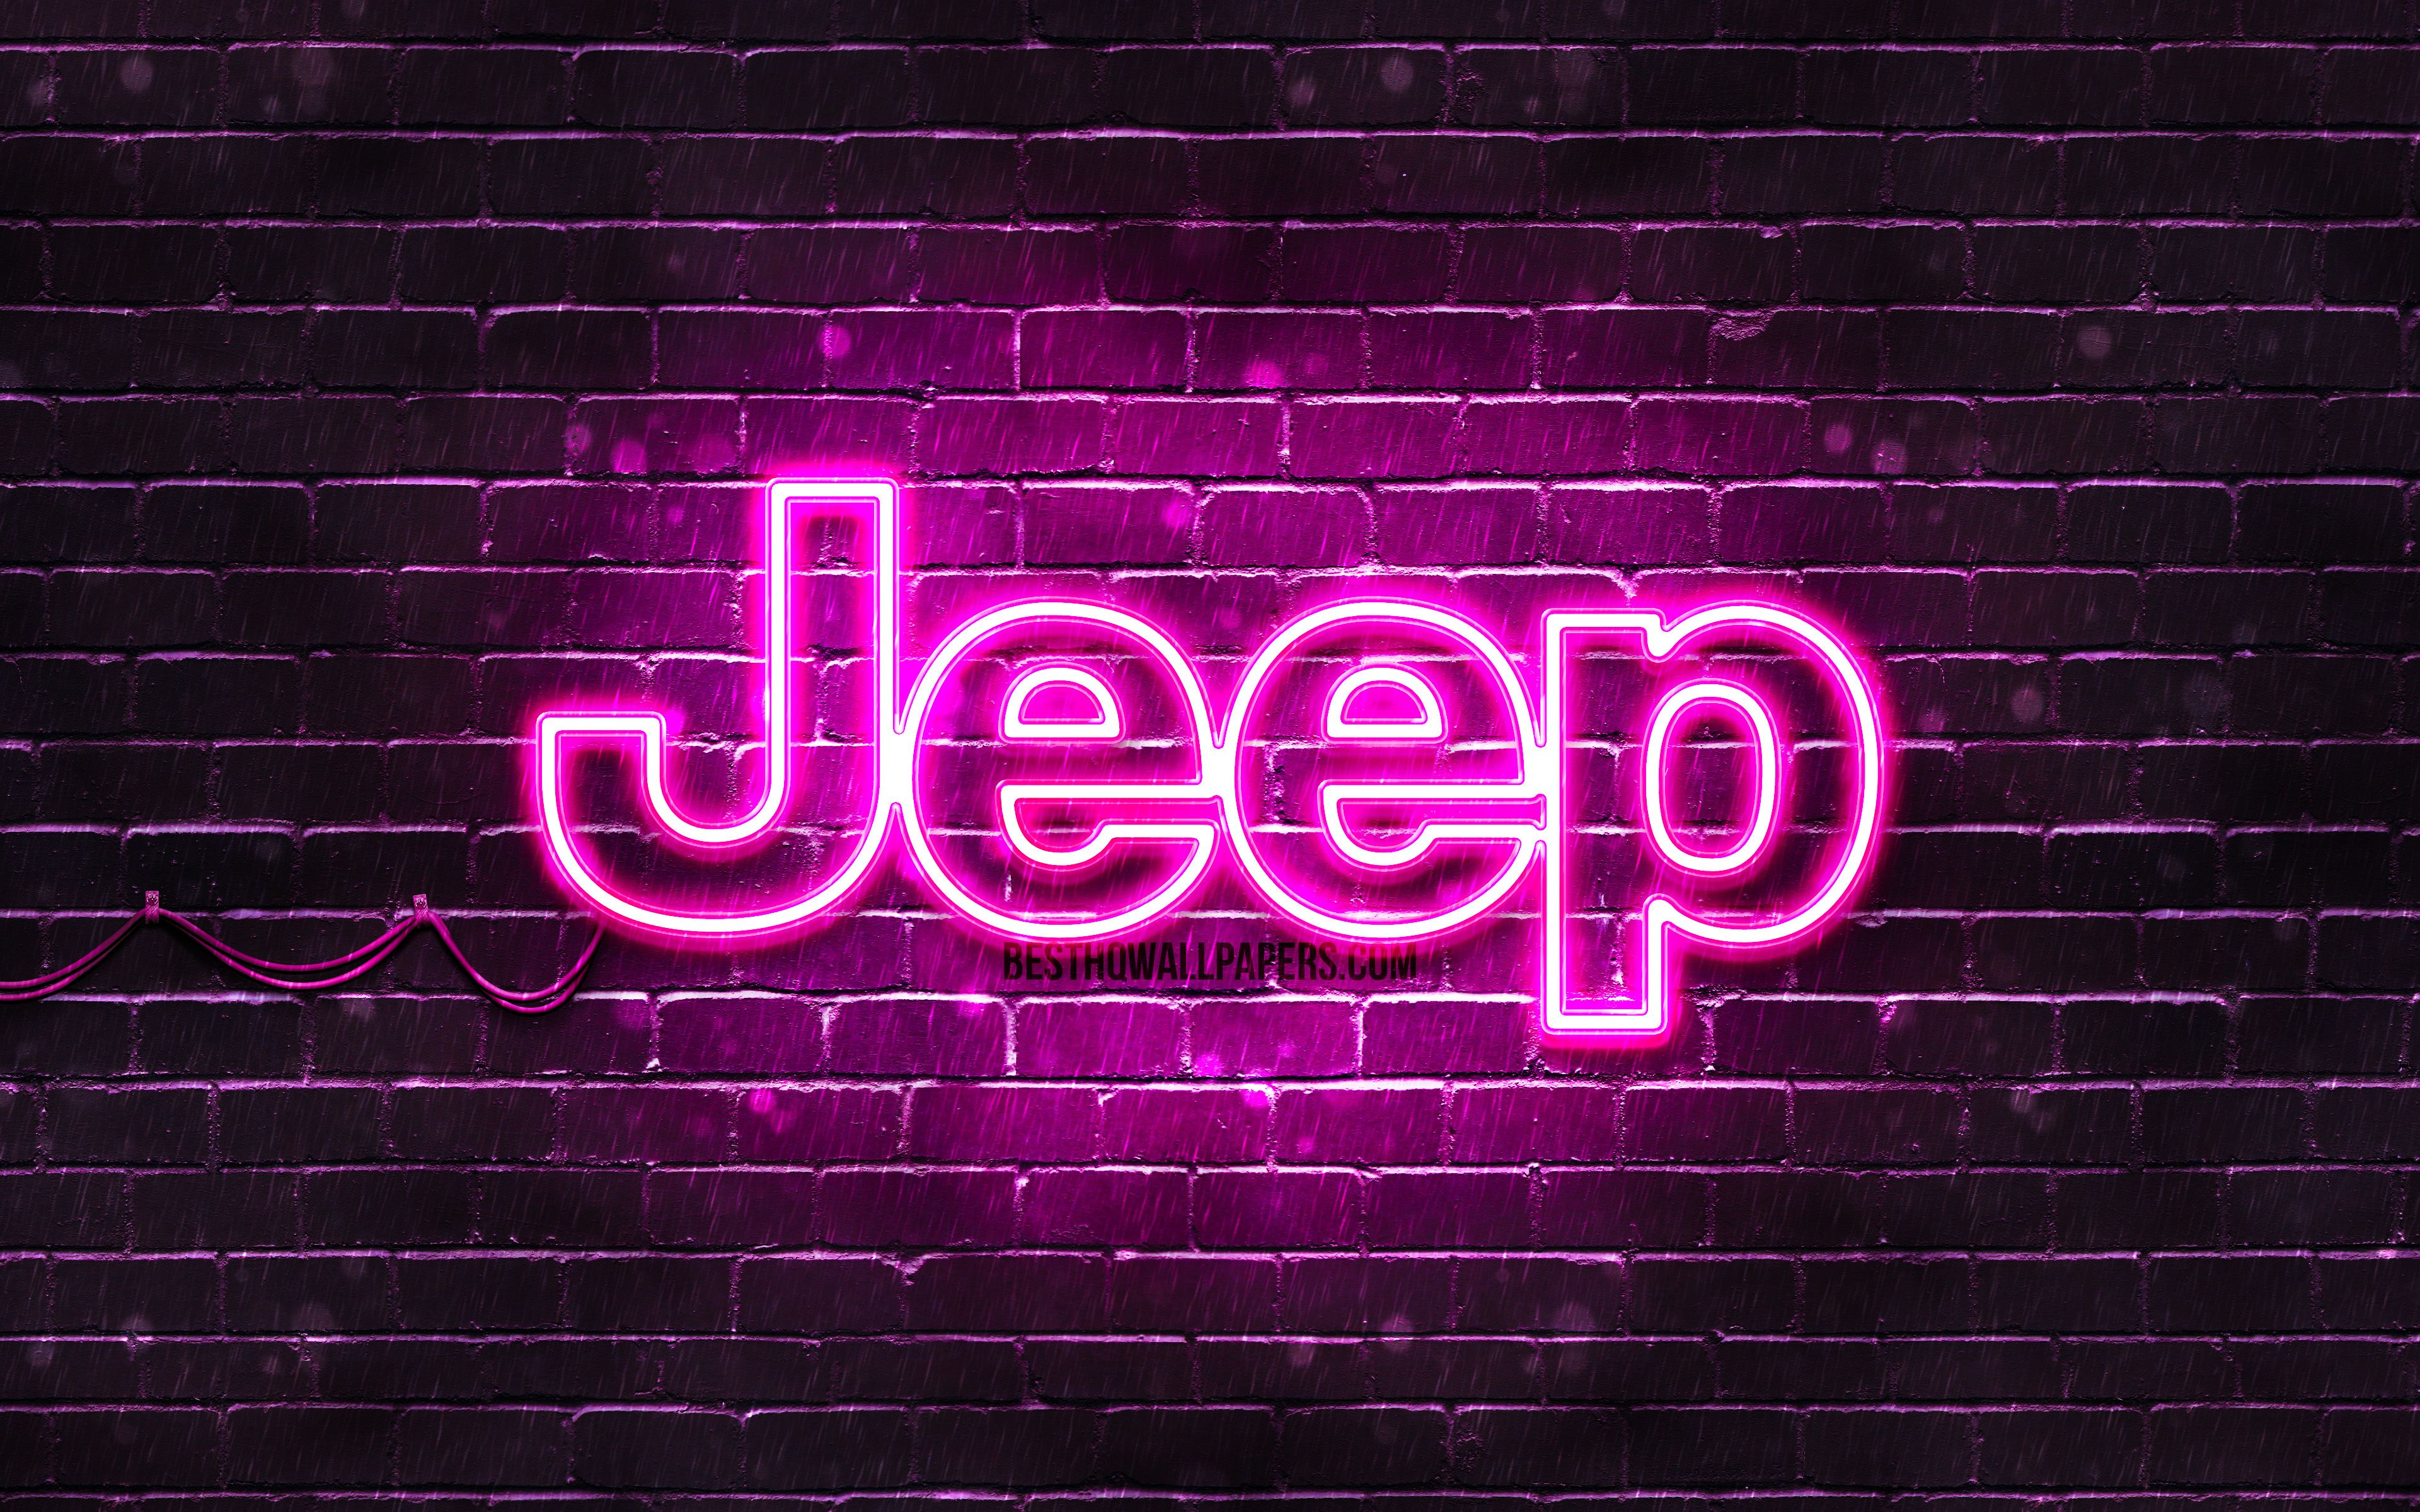 Download wallpaper Jeep purple logo, 4k, purple brickwall, Jeep logo, cars brands, Jeep neon logo, Jeep for desktop with resolution 3840x2400. High Quality HD picture wallpaper